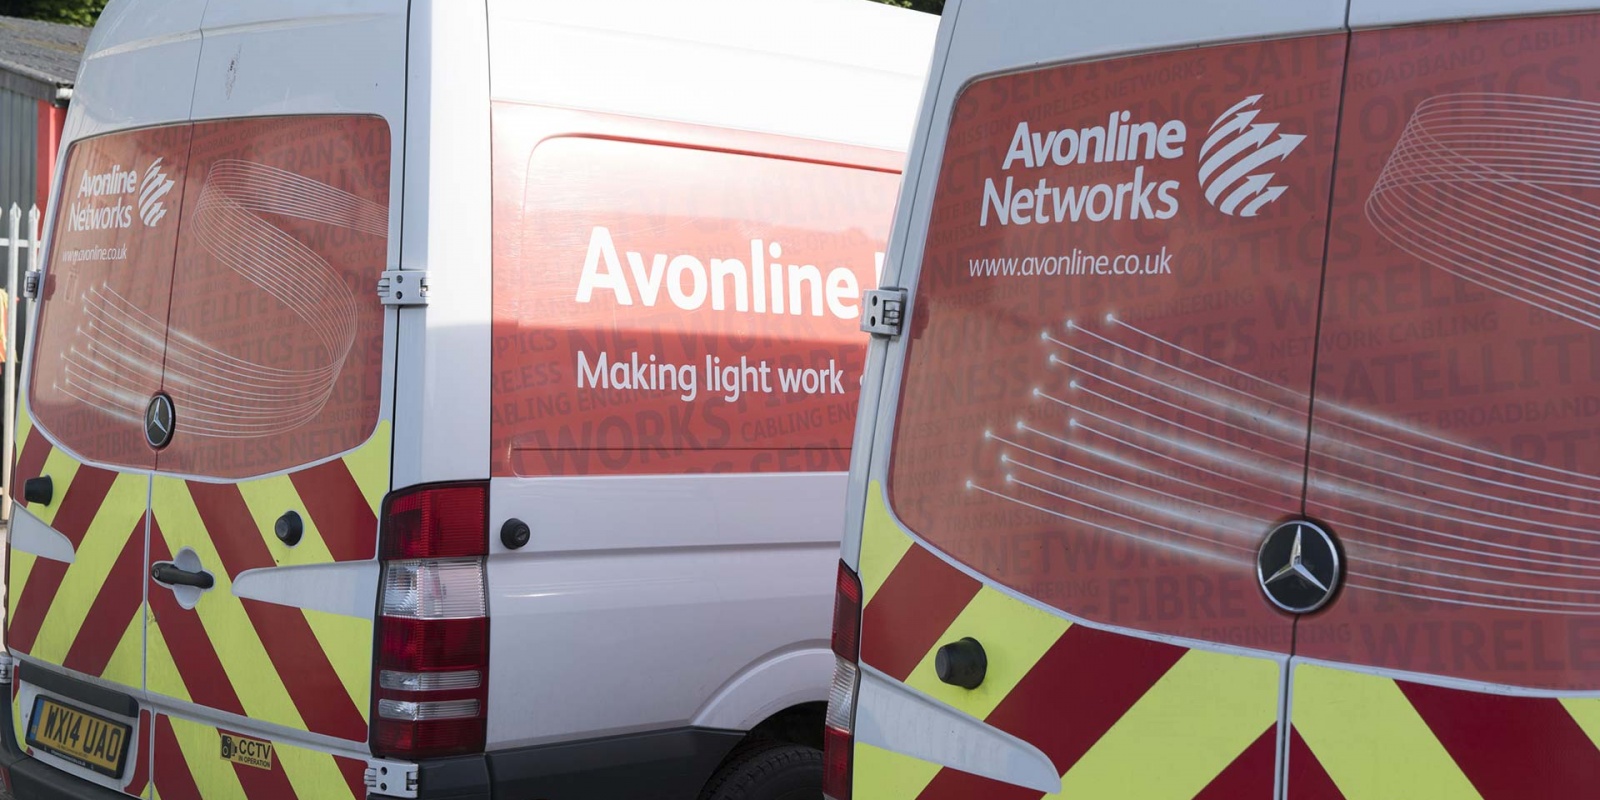 M GROUP SERVICES EXPANDS TELECOMS PRESENCE WITH ACQUISITION OF AVONLINE NETWORKS